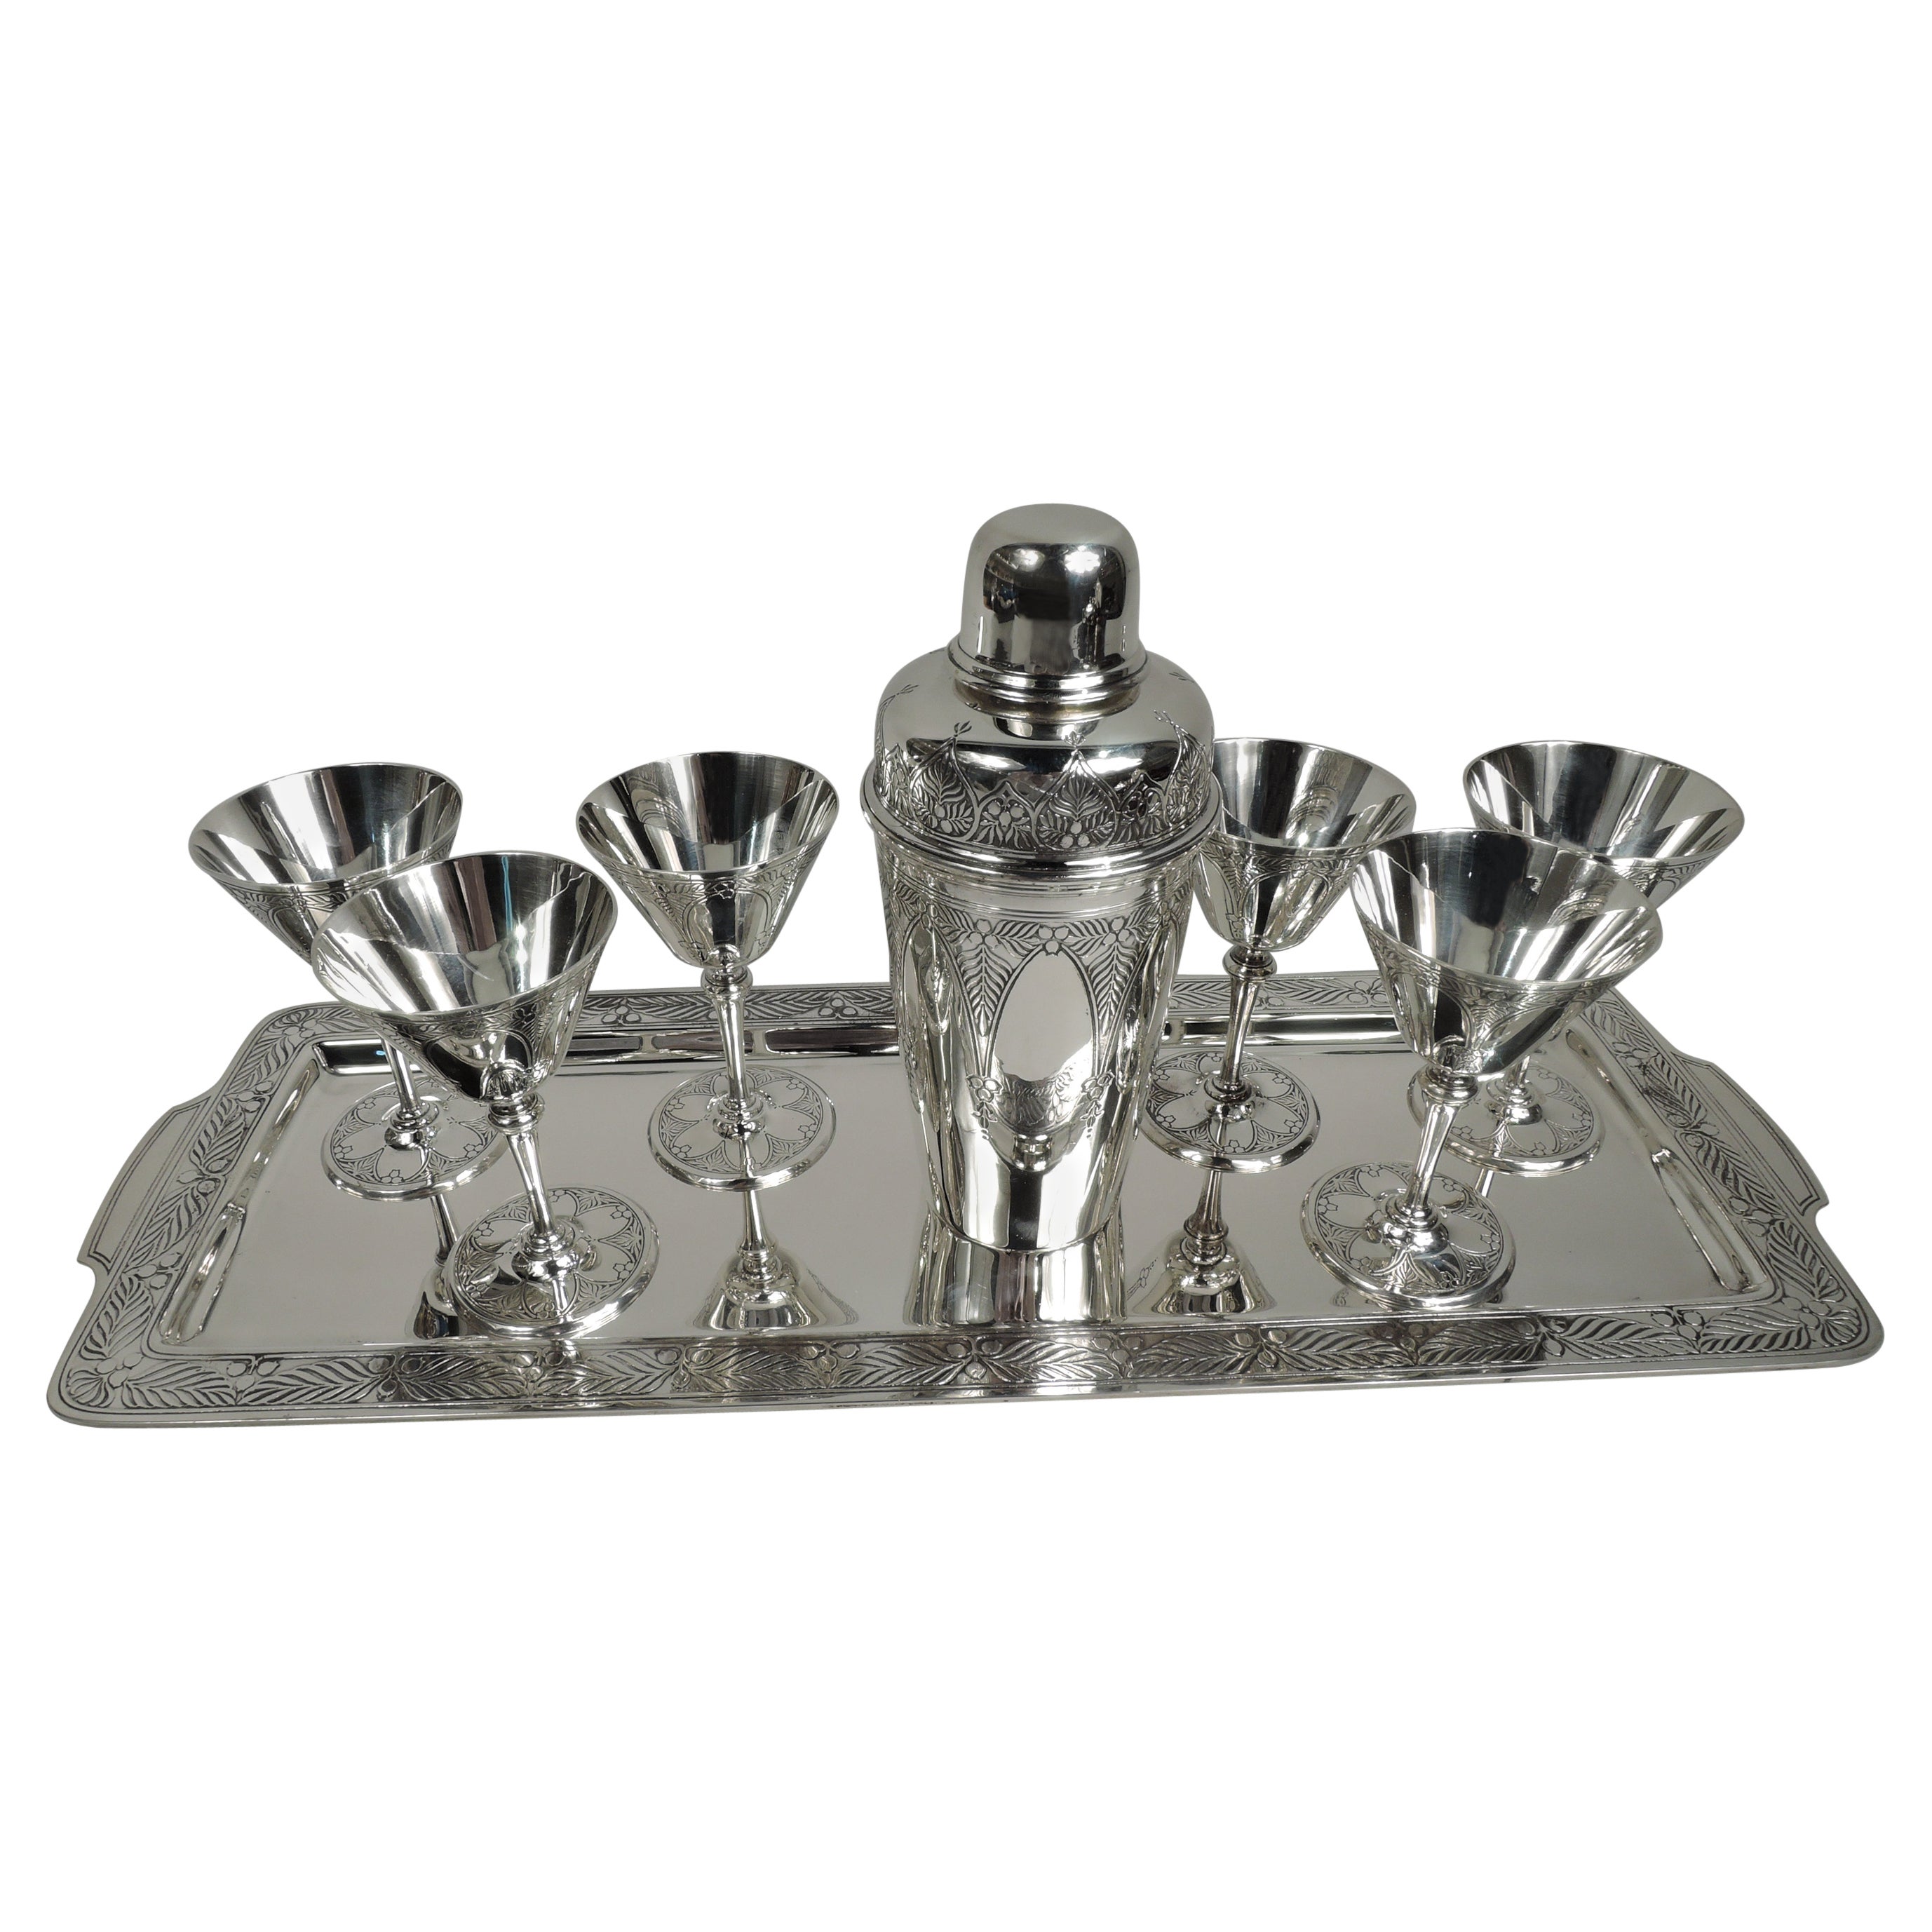 Tiffany Art Deco Bar Set with Cocktail Shaker & Cups on Tray